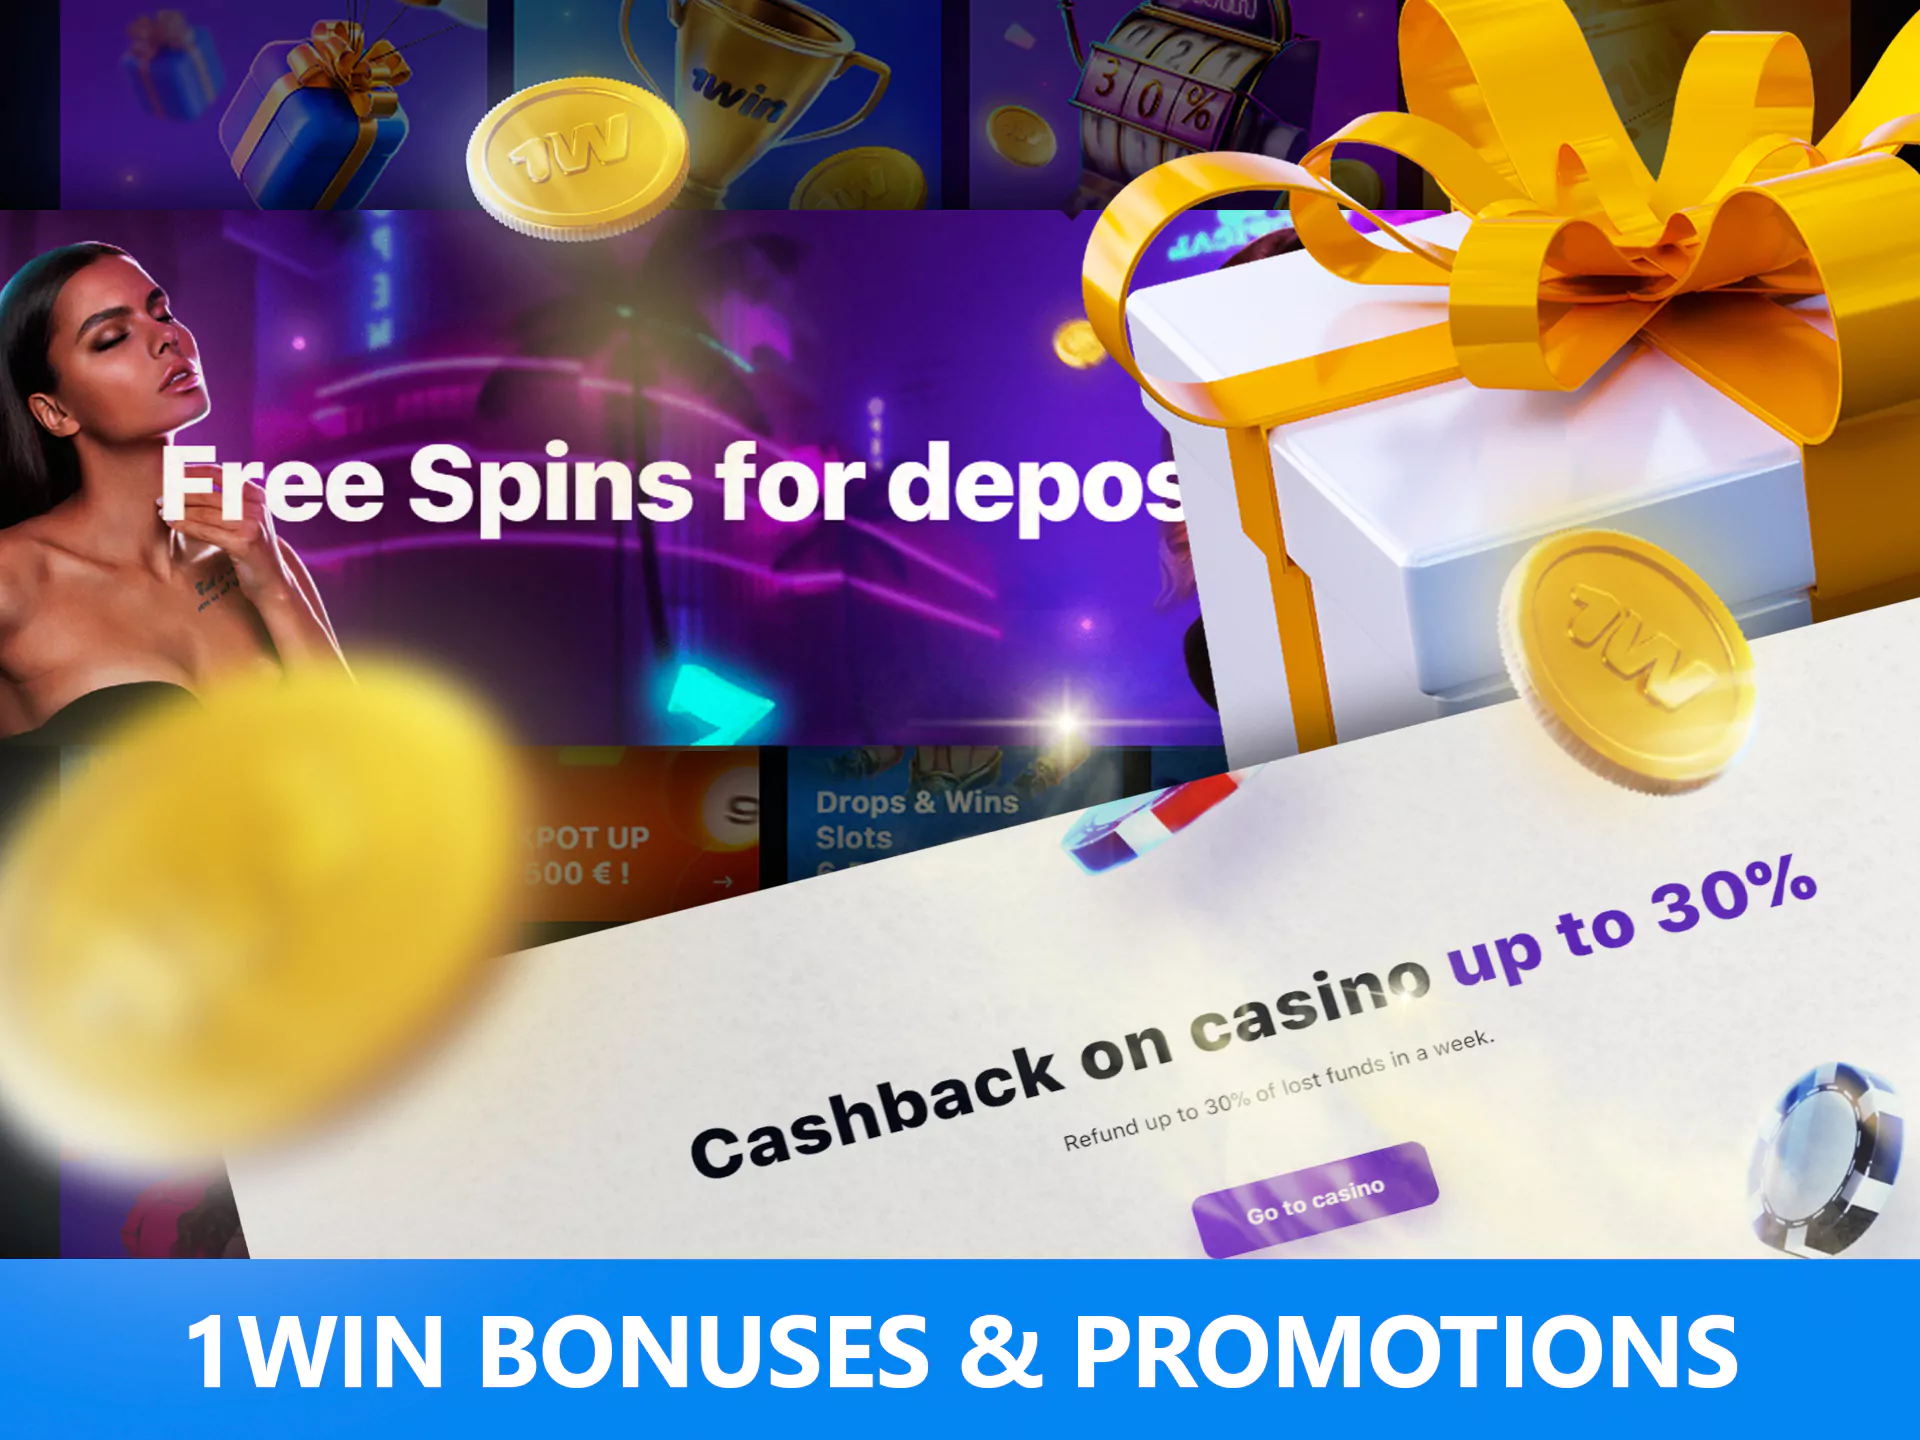 Besides the promo bonus, users can take part in other promotions on 1win.